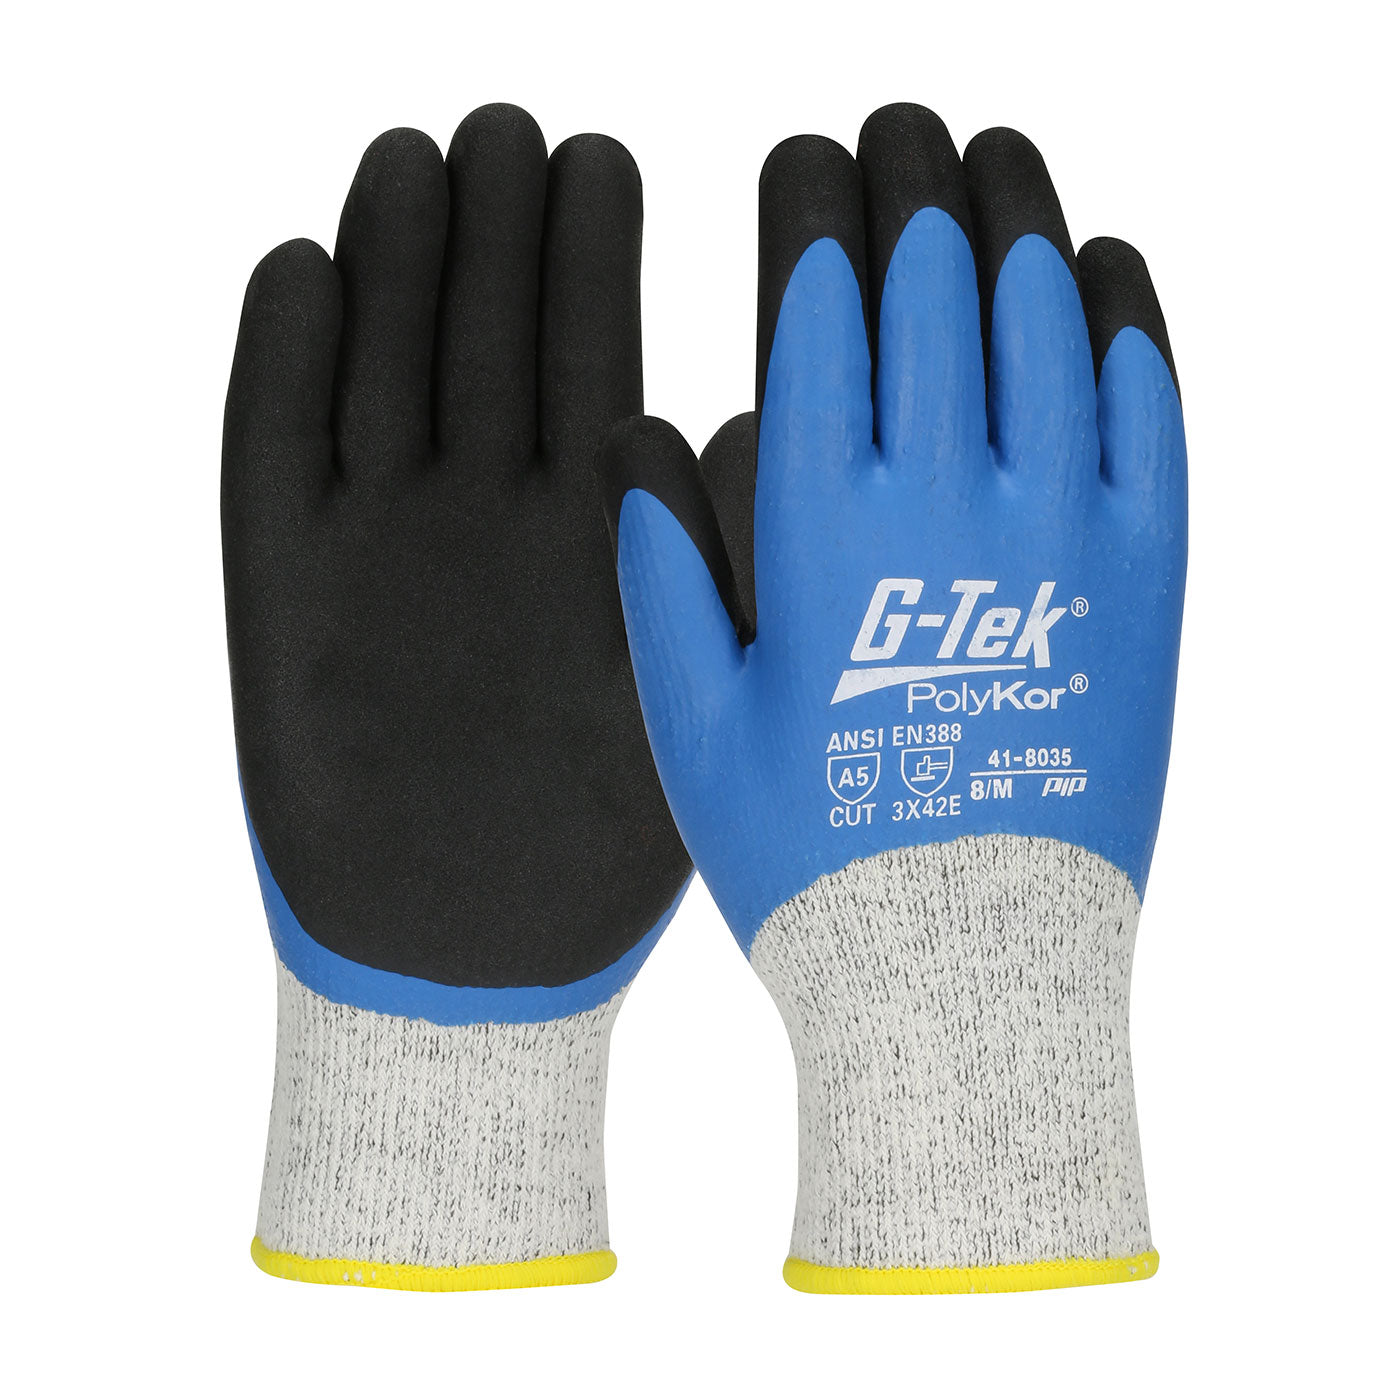 G-Tek® PolyKor® Seamless Knit Single-Layer PolyKor® / Acrylic Blended Glove with Double-Dipped Latex Coated MicroSurface Grip on Full Hand